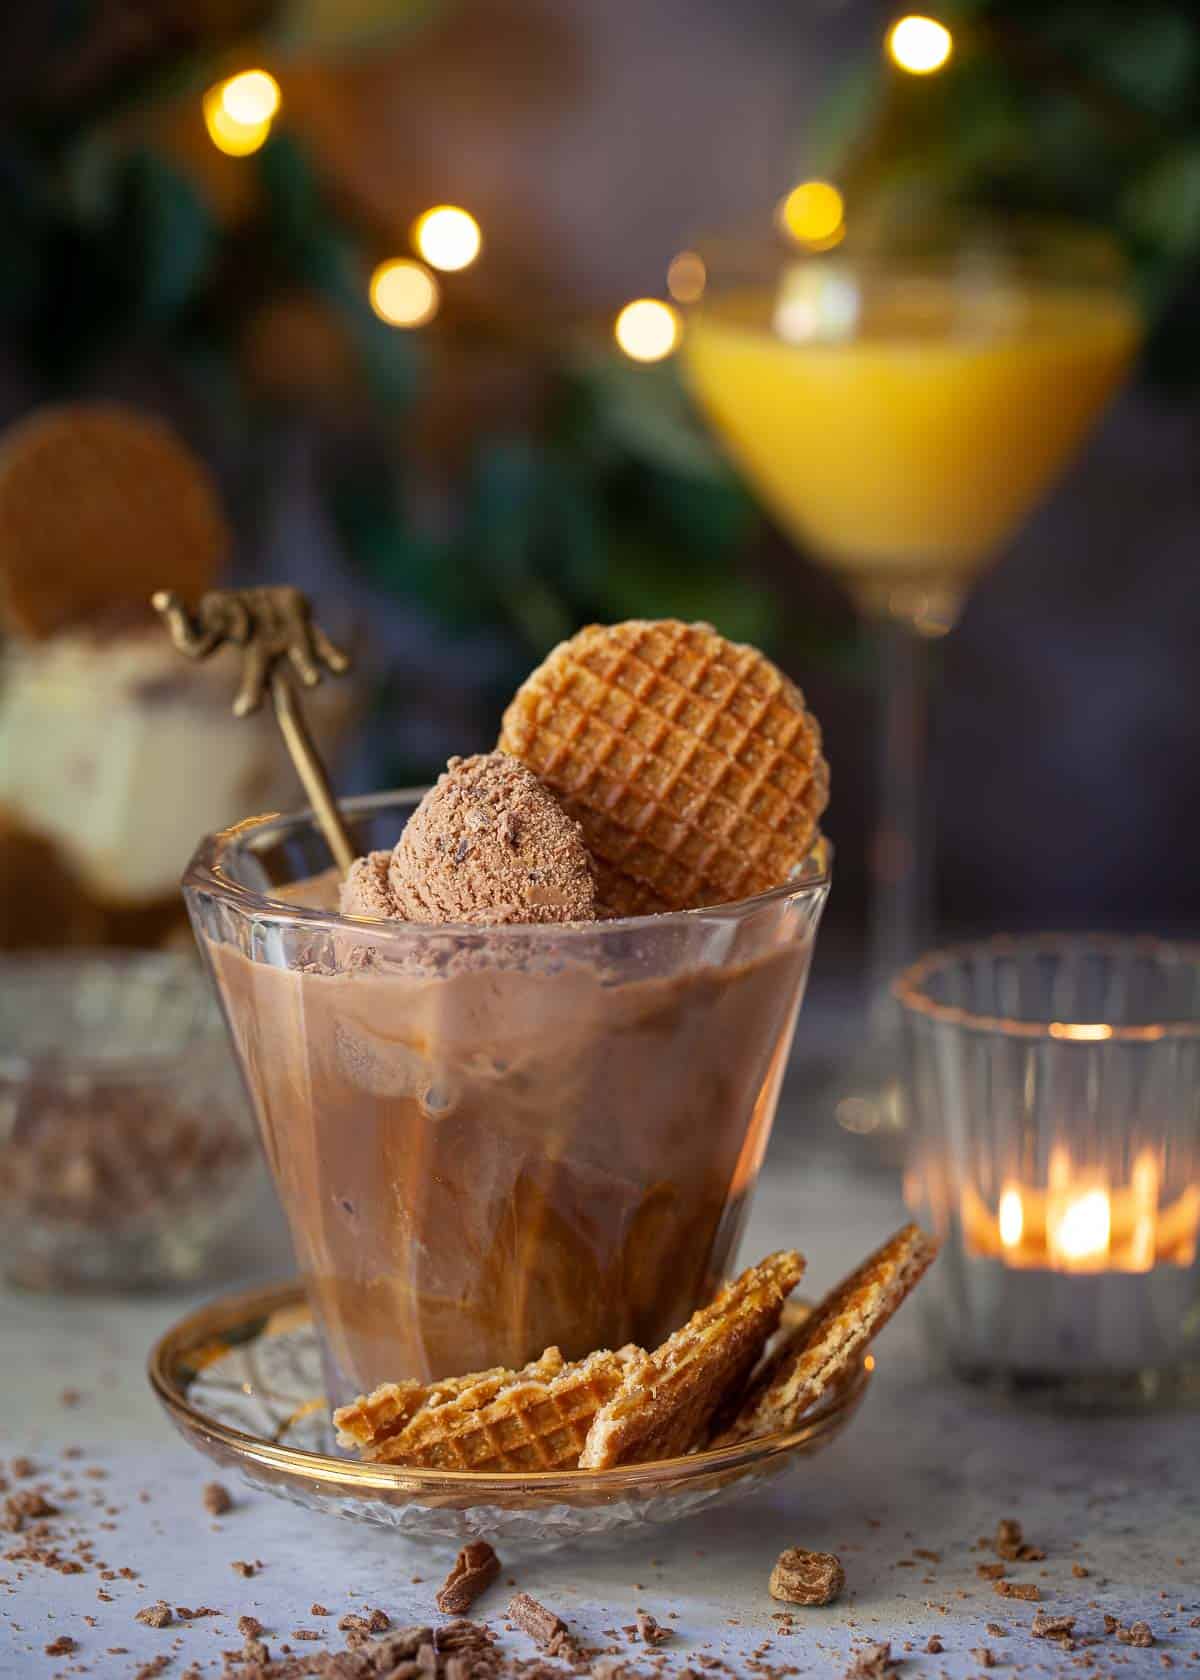 Chocolate affogato dessert with a stroopwafel cookie.